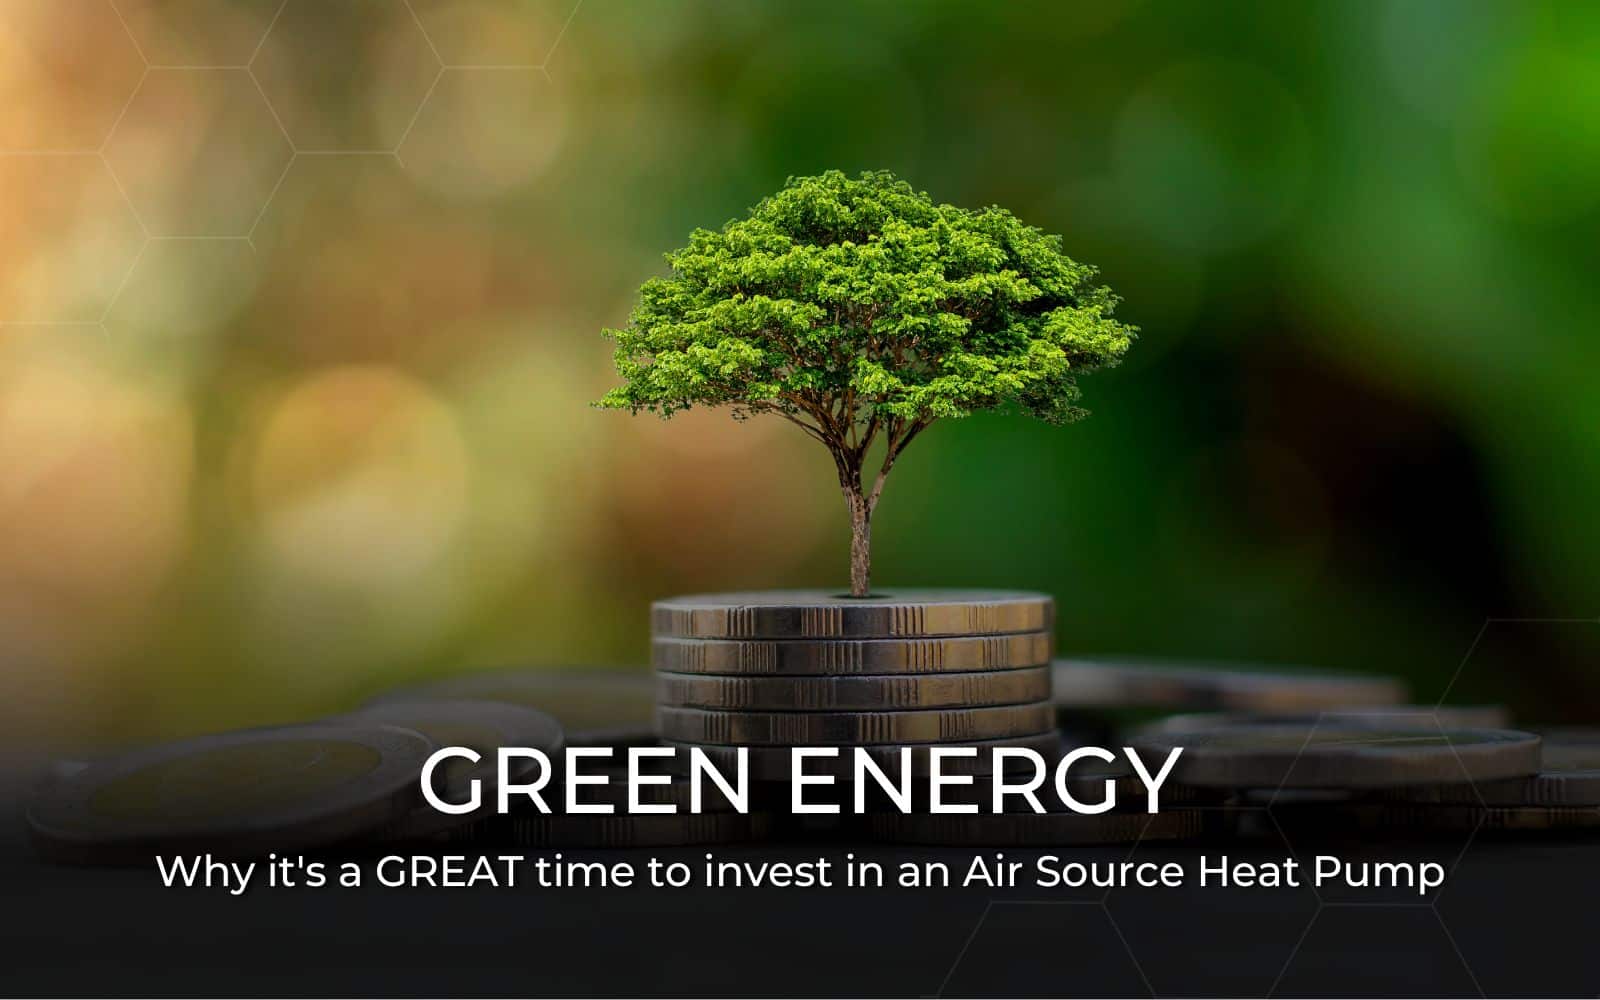 Why it's a great time to invest in an Air Source Heat Pump